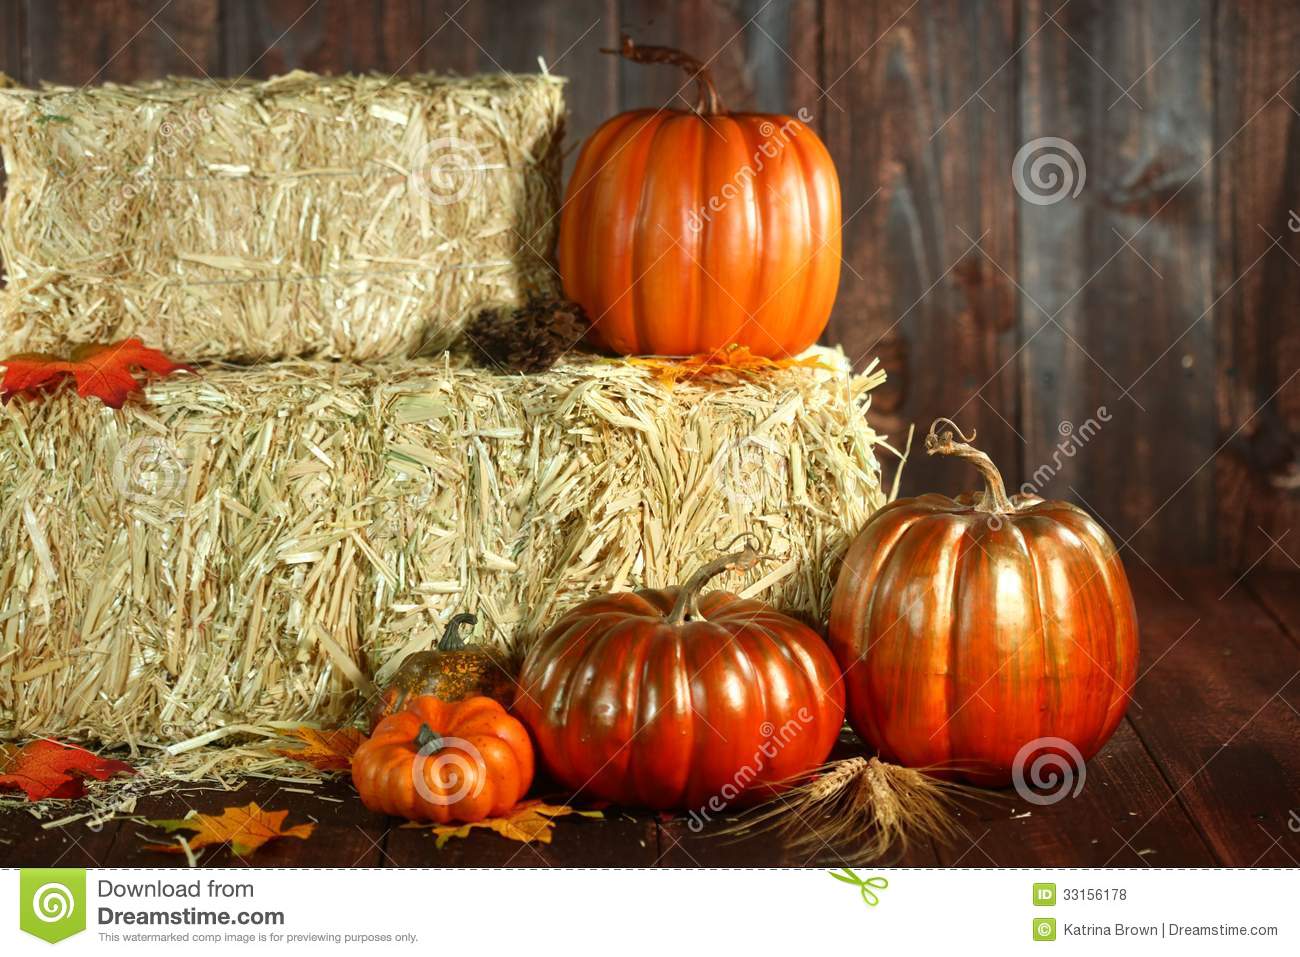 Fall Scene With Pumpkins Fall Themed Scene With